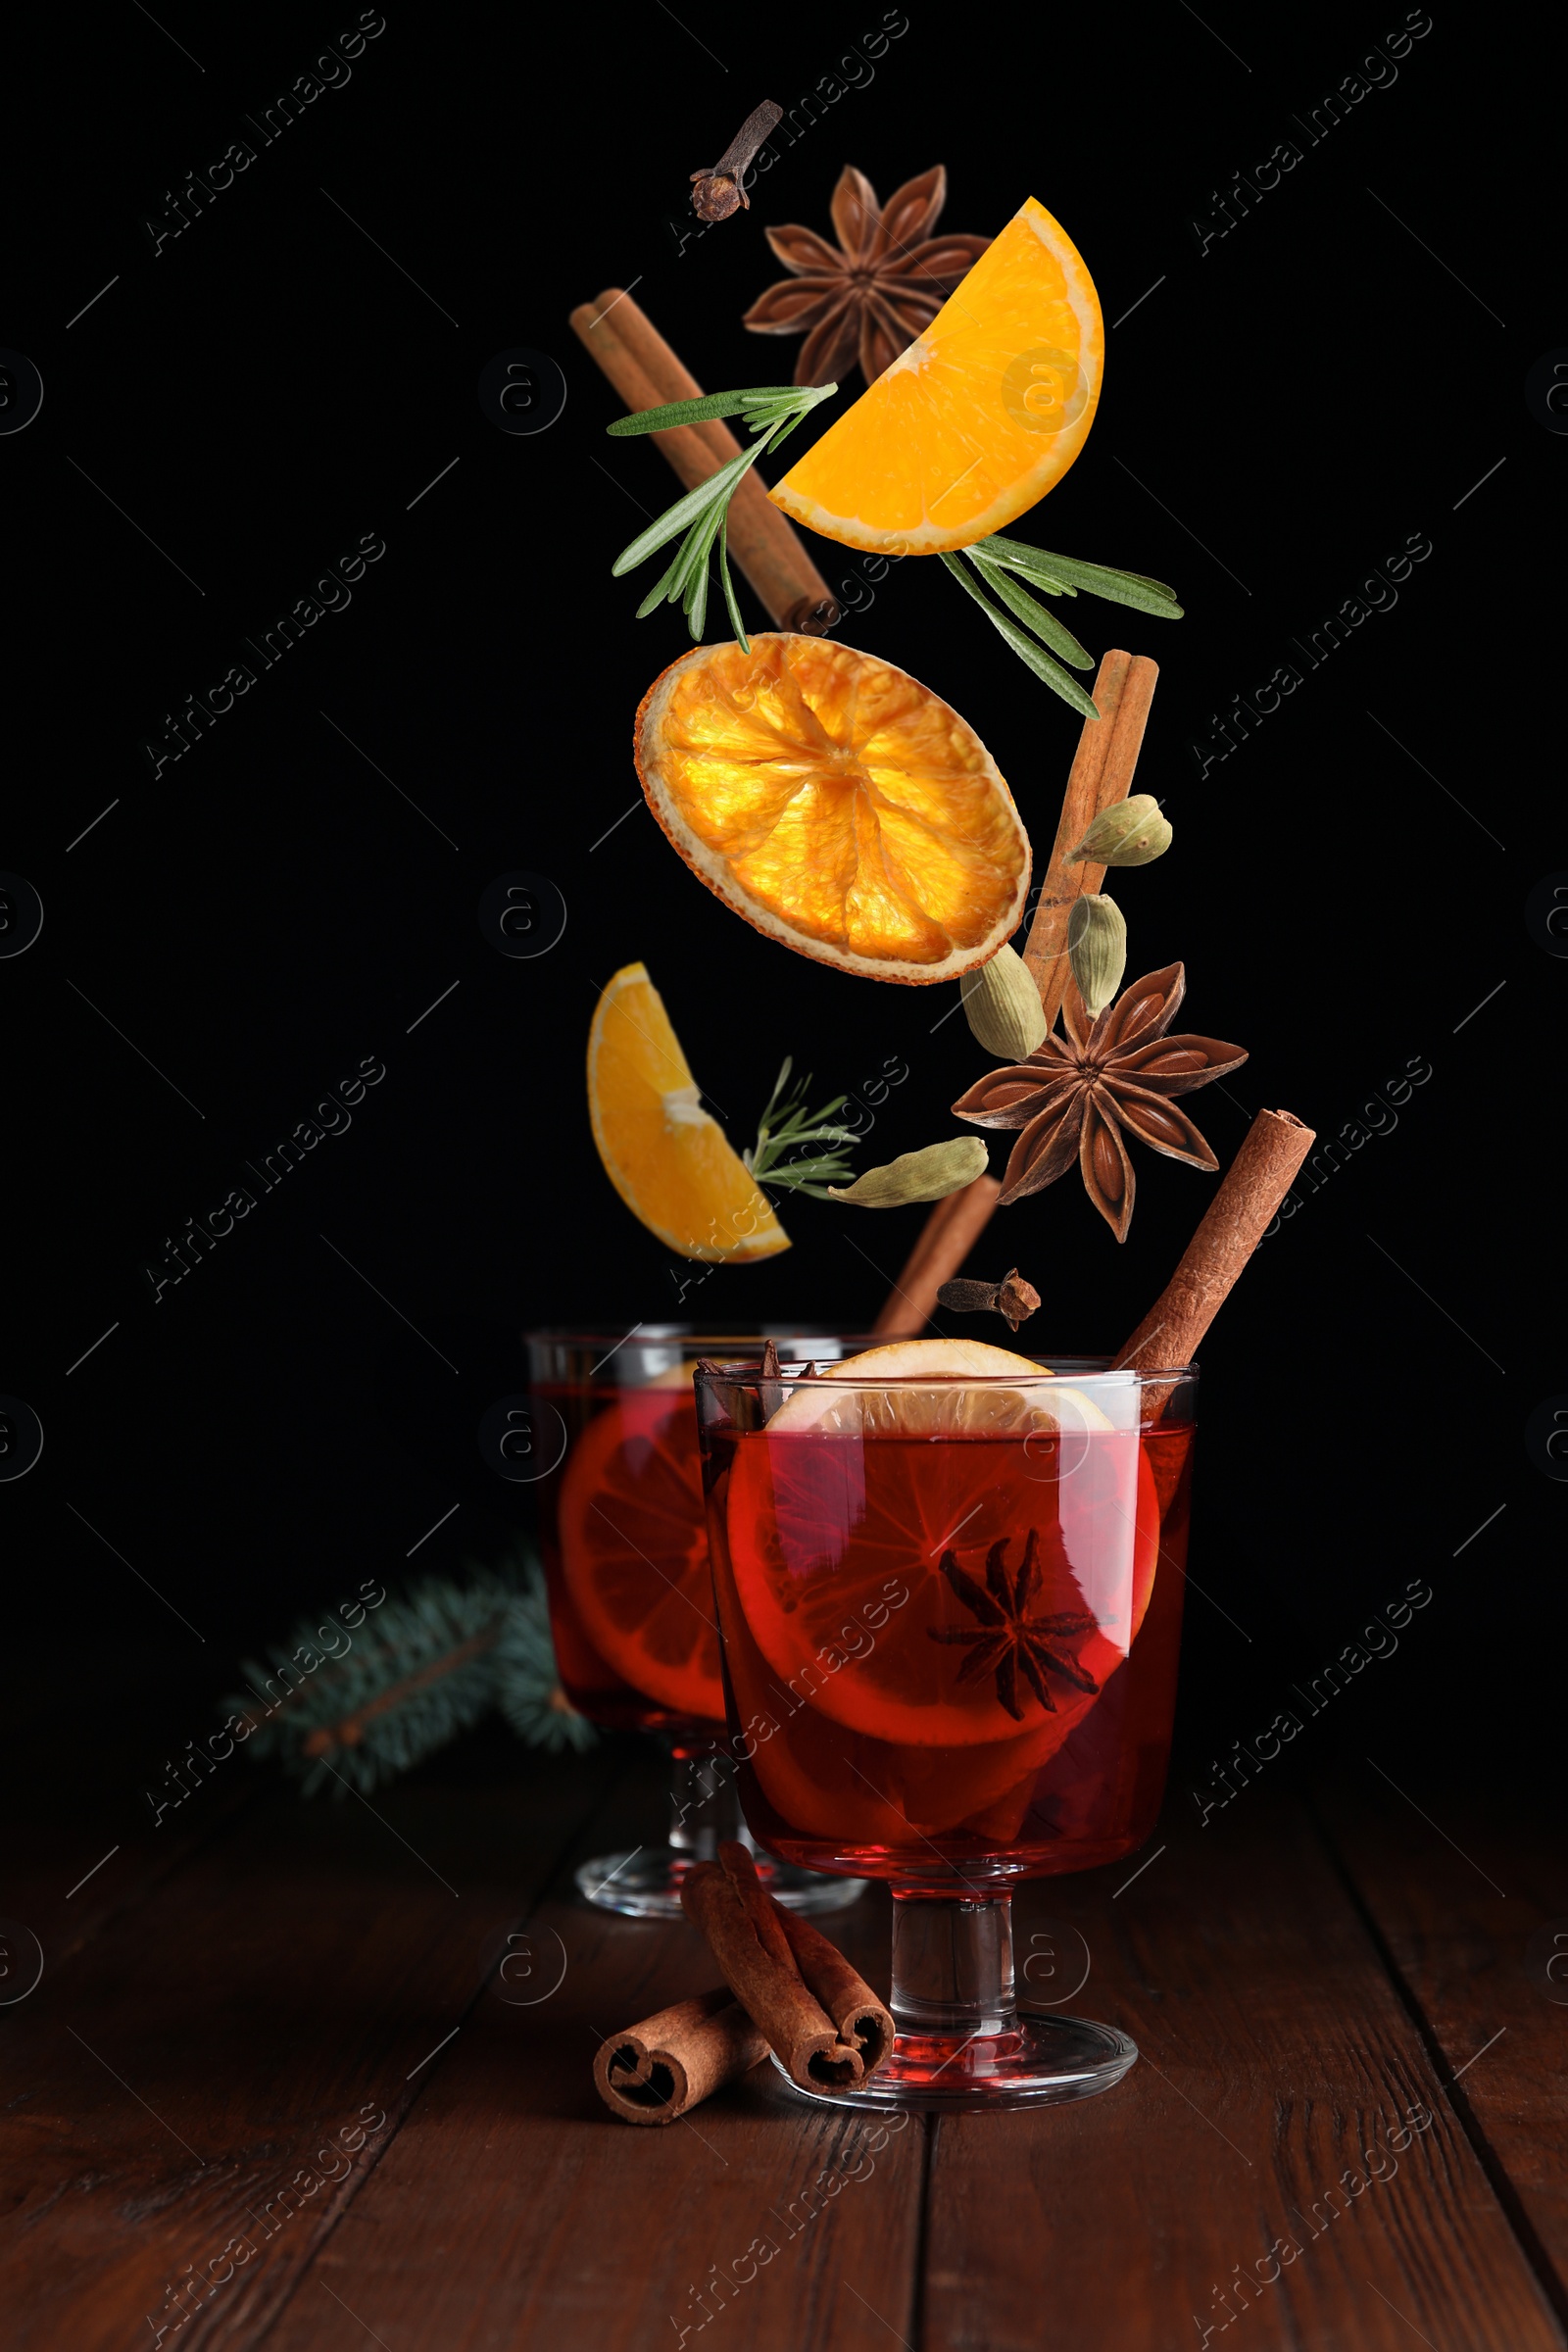 Image of Cut orange and different spices falling into glass cups of mulled wine on wooden table against black background